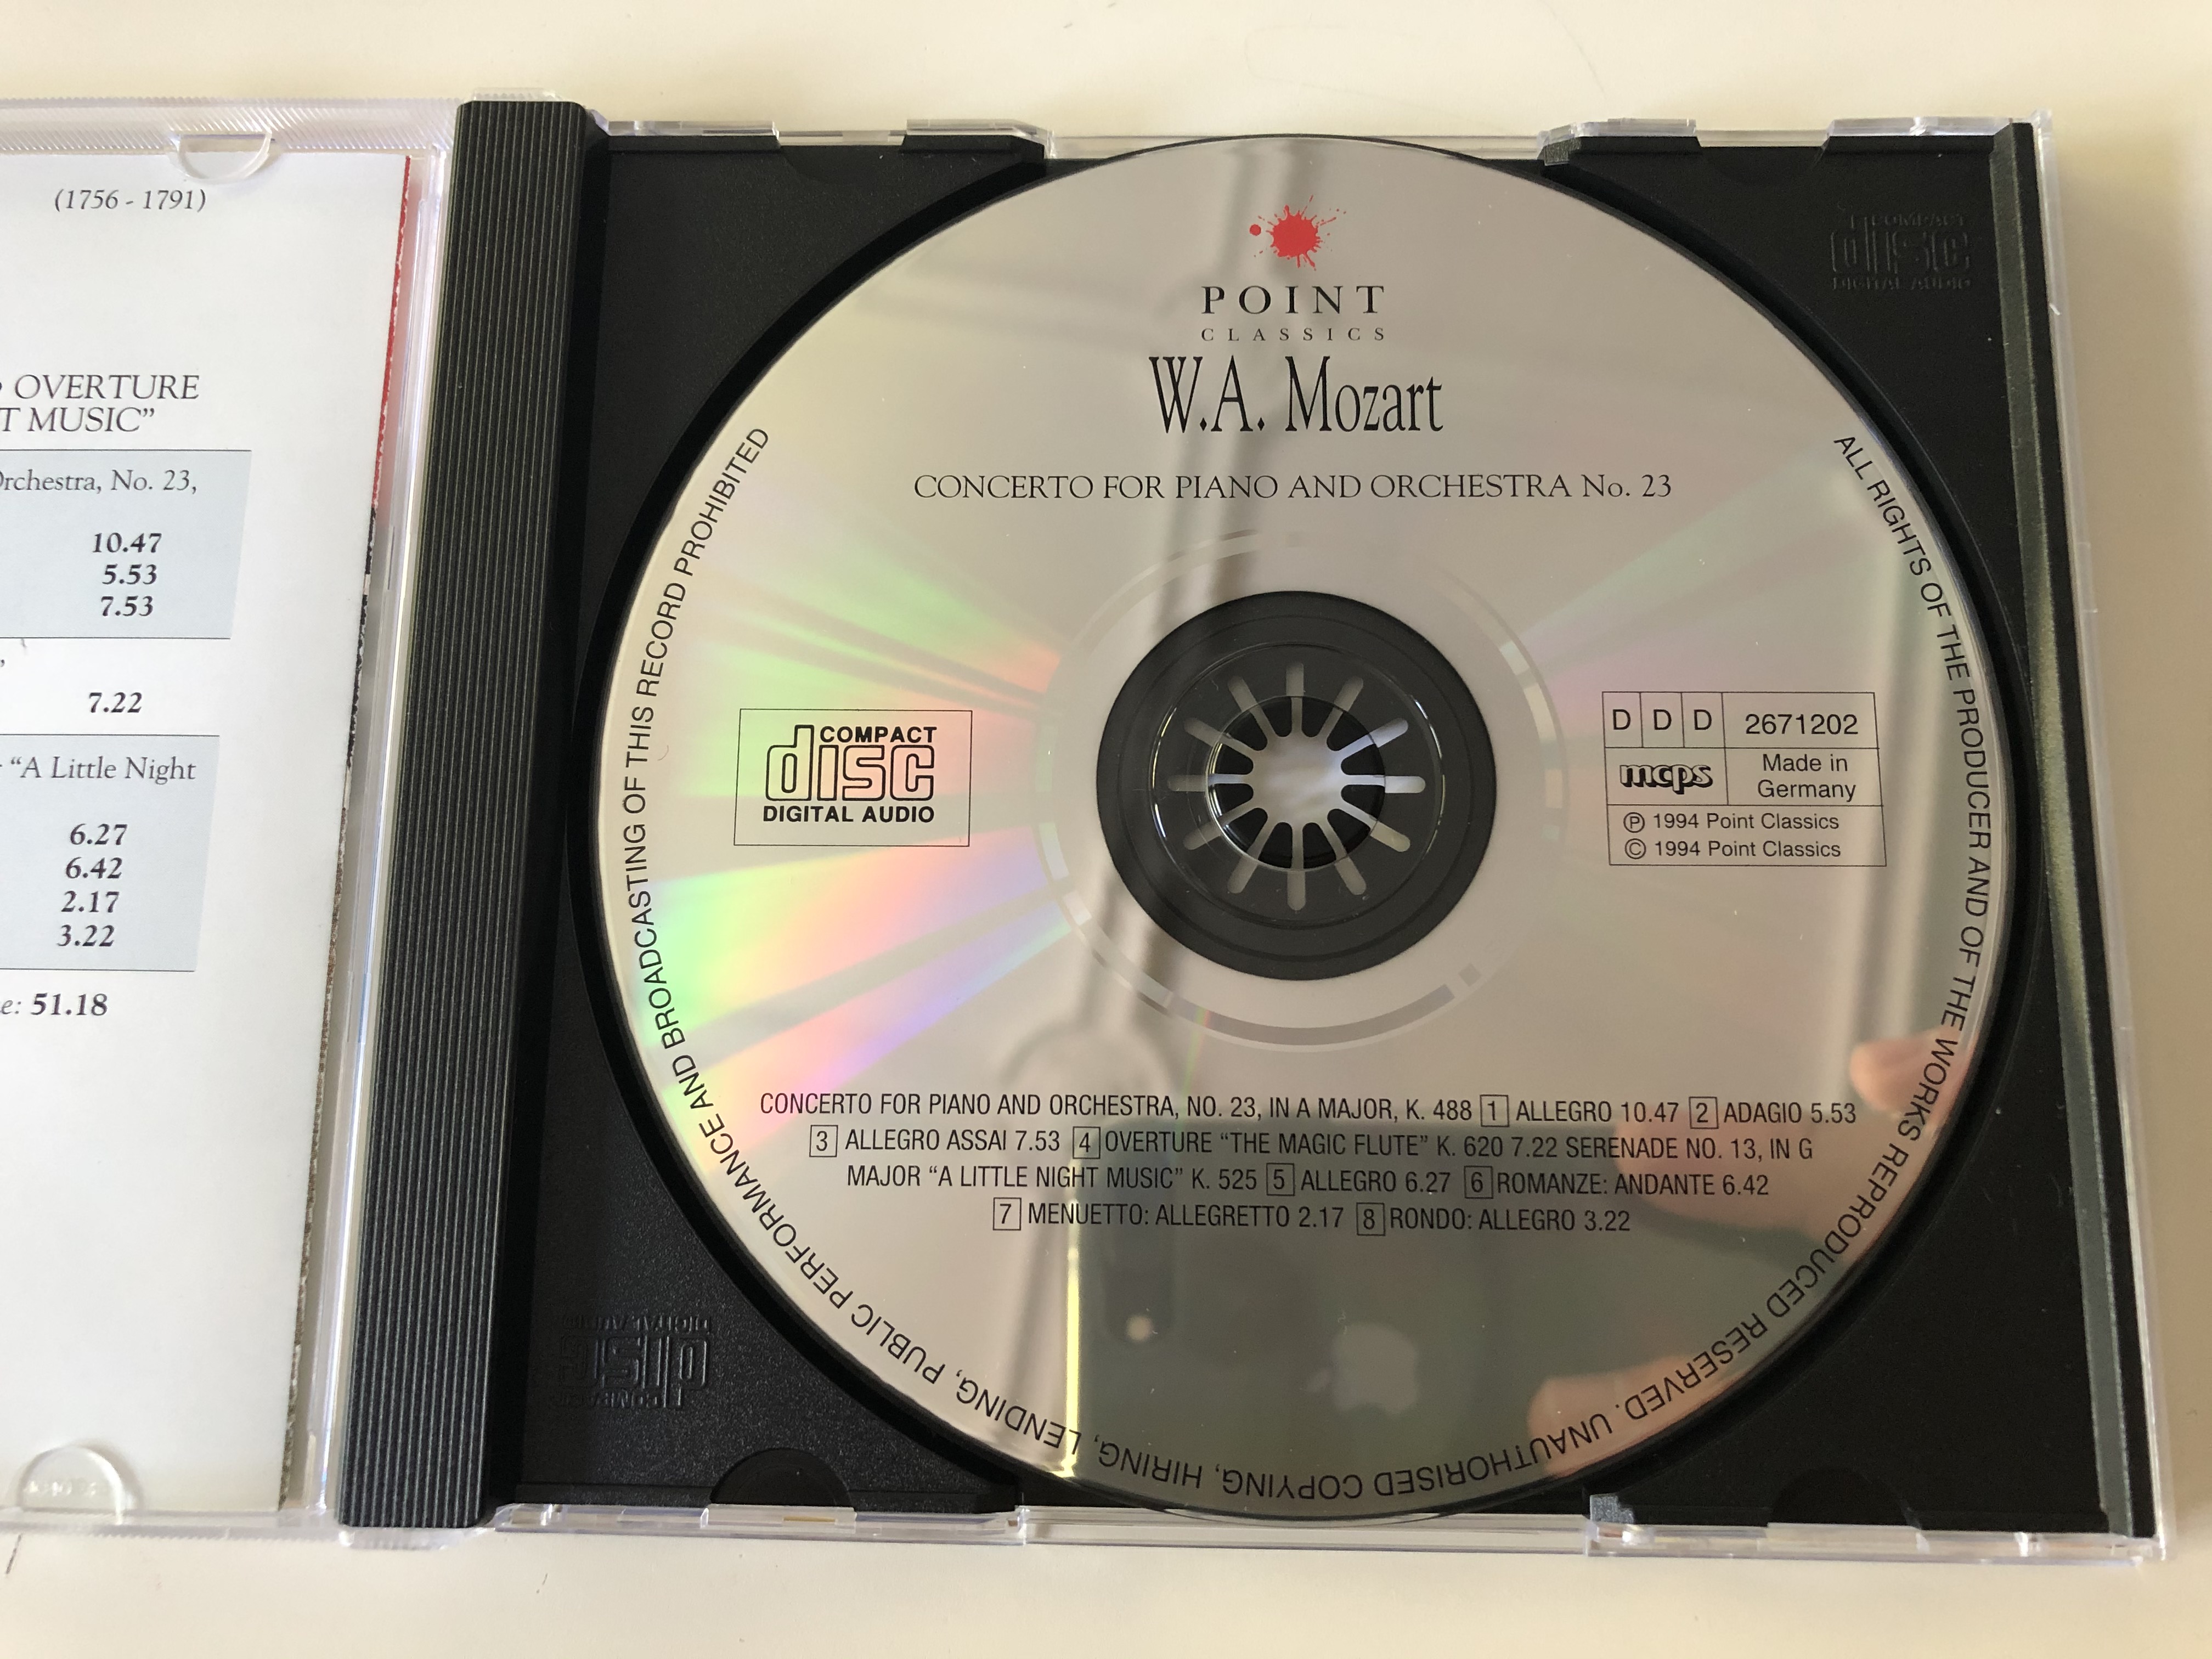 mozart-concerto-for-piano-and-orchestra-no.-23-overture-the-magic-flute-serenade-a-little-night-music-point-classics-audio-cd-1994-2671202-4-.jpg